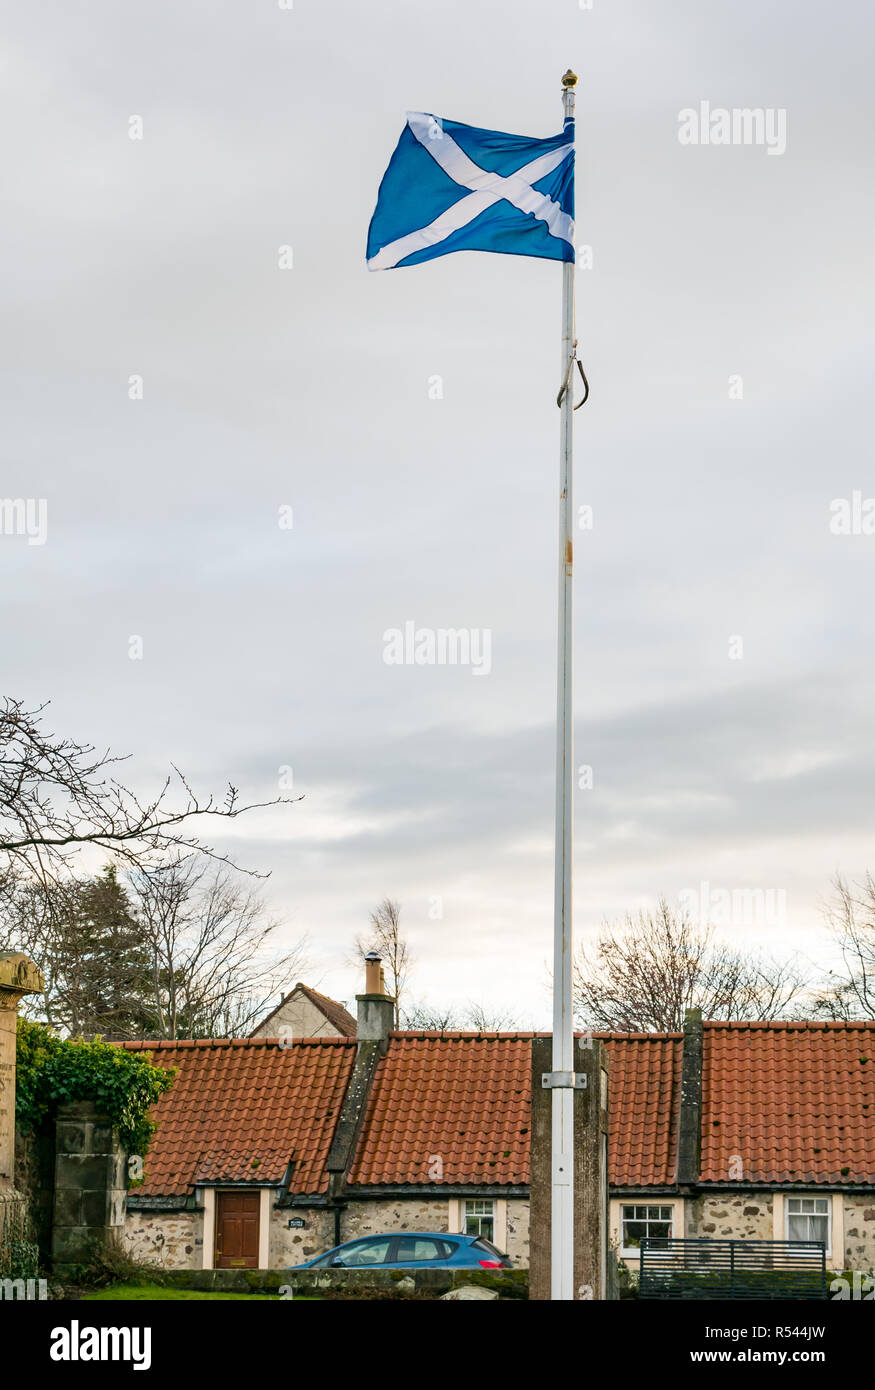 Athelstaneford, East Lothian, Scotland, United Kingdom, 29th November 2018. Birthplace of St Andrew's Cross, the saltire flag. On the eve of St Andrew's Day the Scottish National Flag Heritage Centre saltire flag blows in the wind. Legend says that on the eve of a battle between Picts and Angles from Northumbria in 832AD Saint Andrew had a vision of victory and when the Picts saw a white cross formed by clouds in a blue sky they attributed their victory to his blessing, adopting the cross as a flag Stock Photo